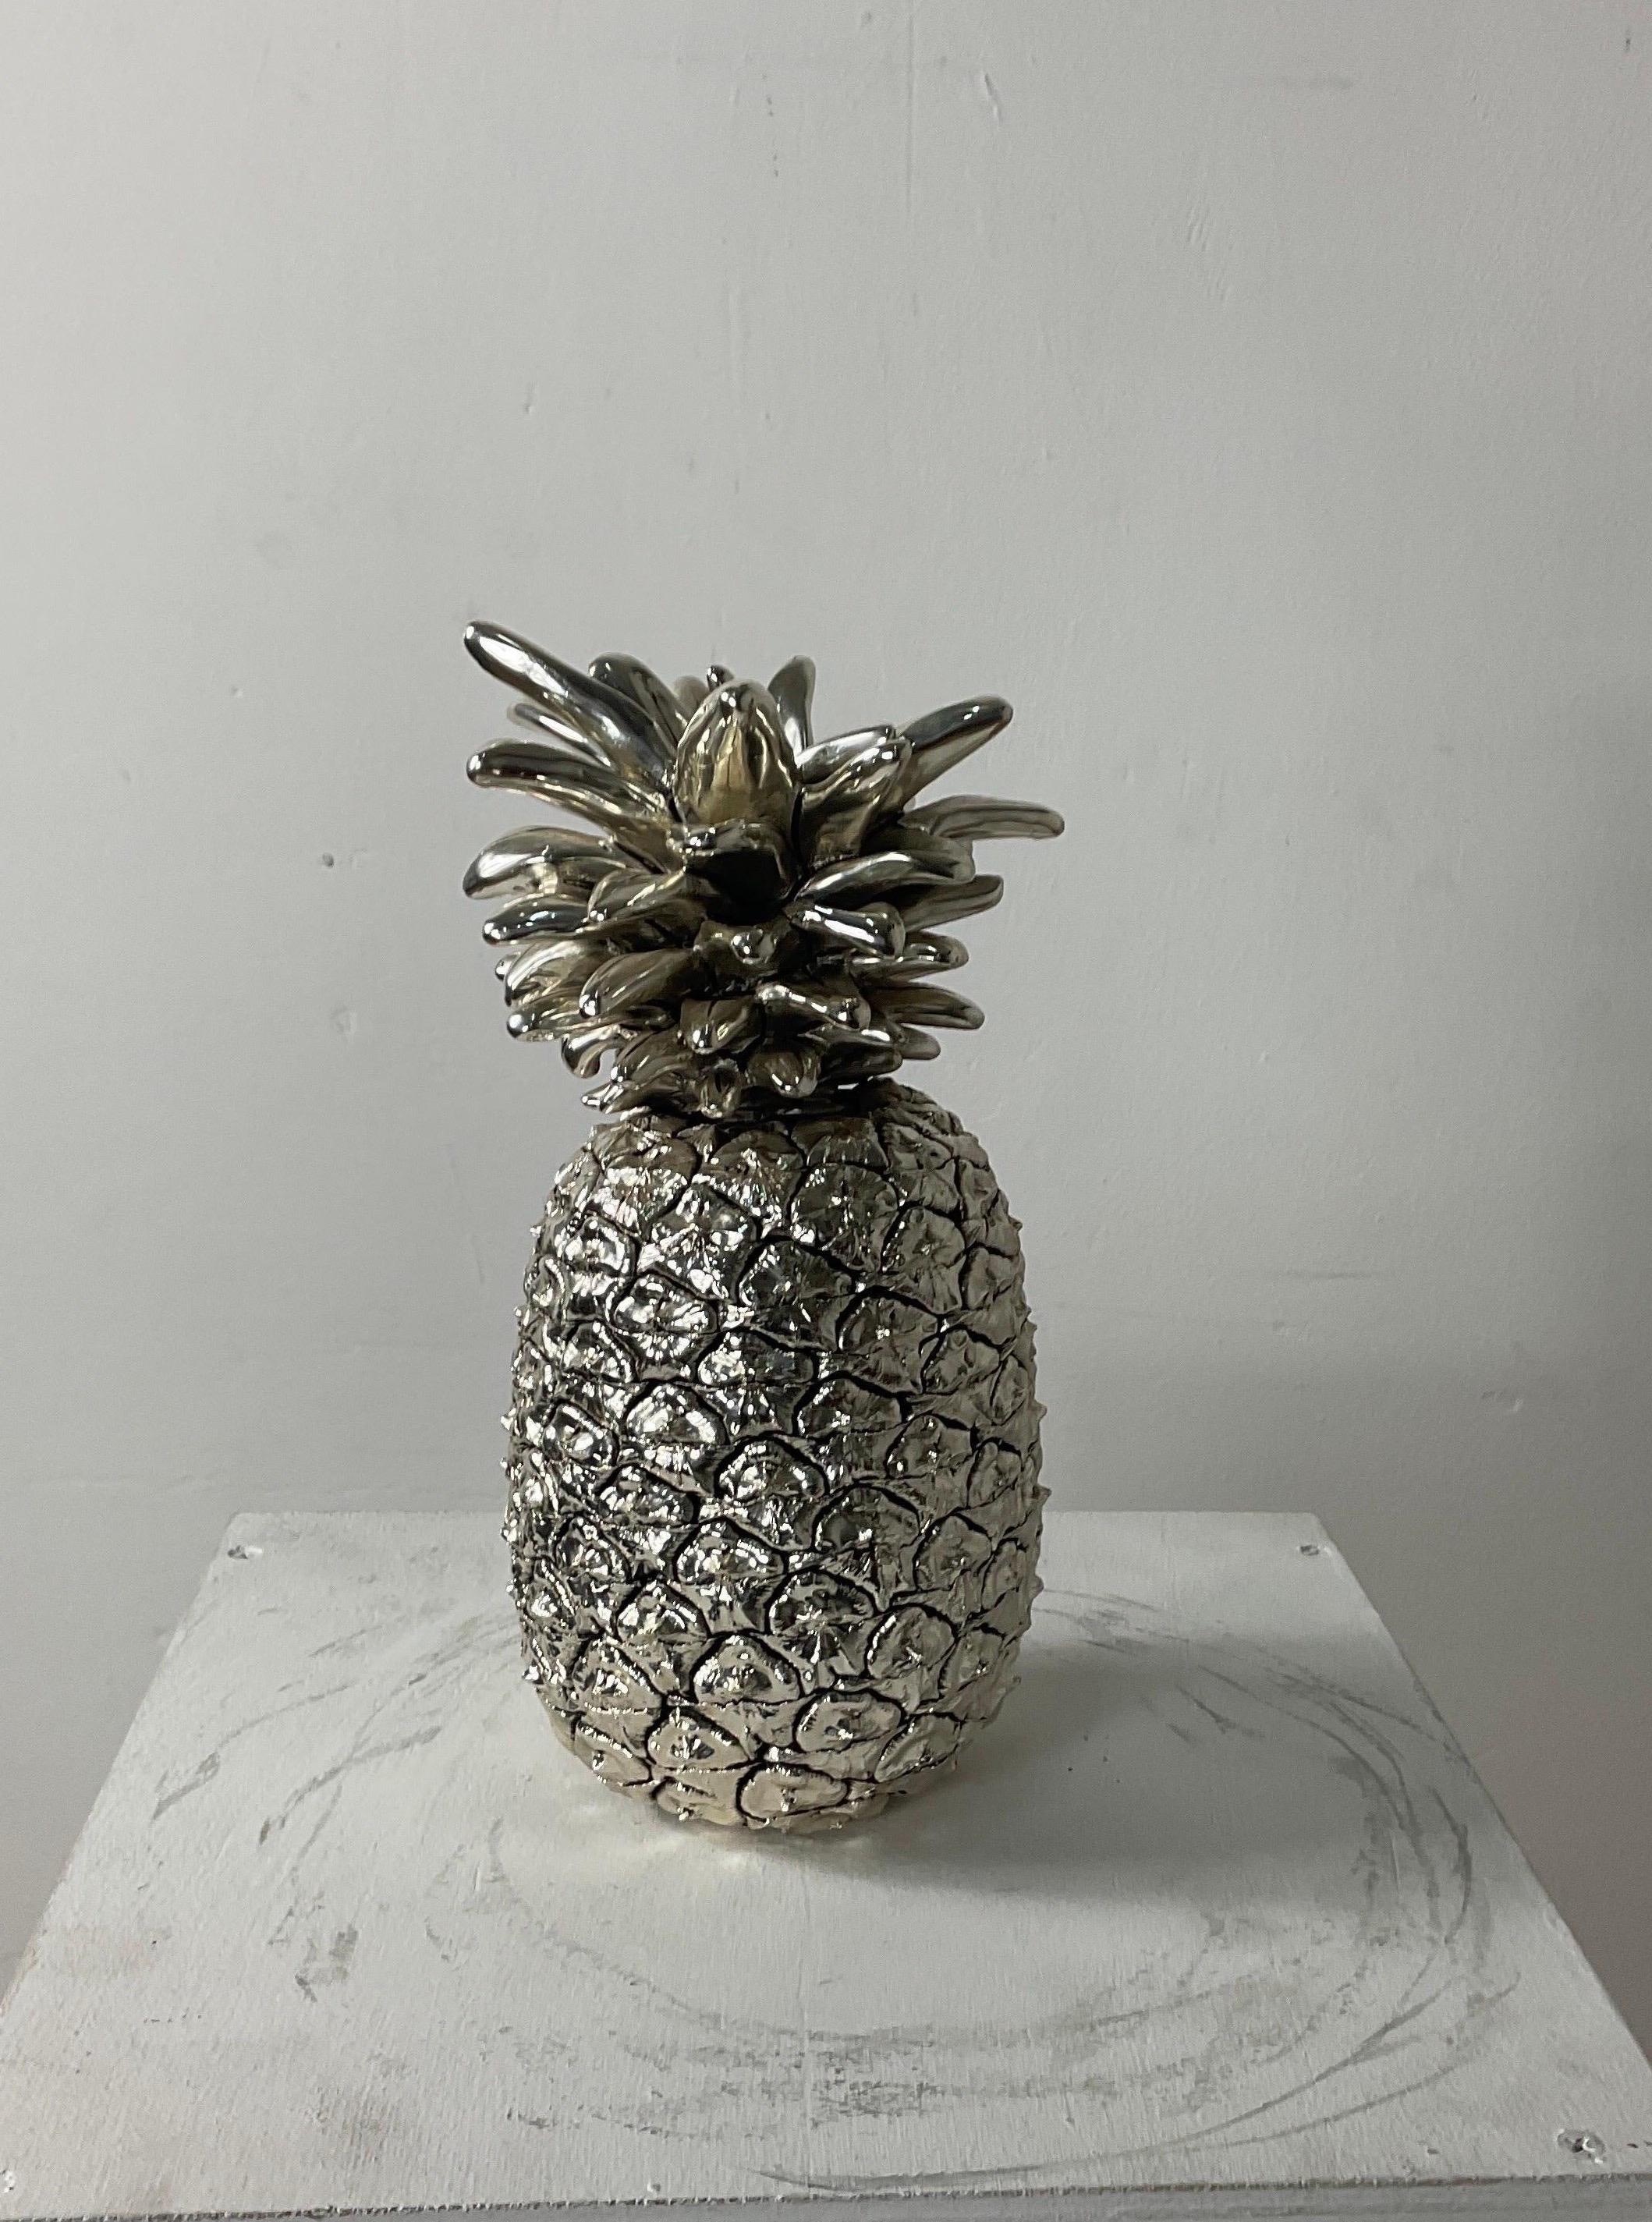 Metal foil sculpture with pineapple shape in perfect condition. Attributable to the Italian designer Marcello Giorgio. The pineapple is very detailed and realistic. 800 Laminated signed and stamped.